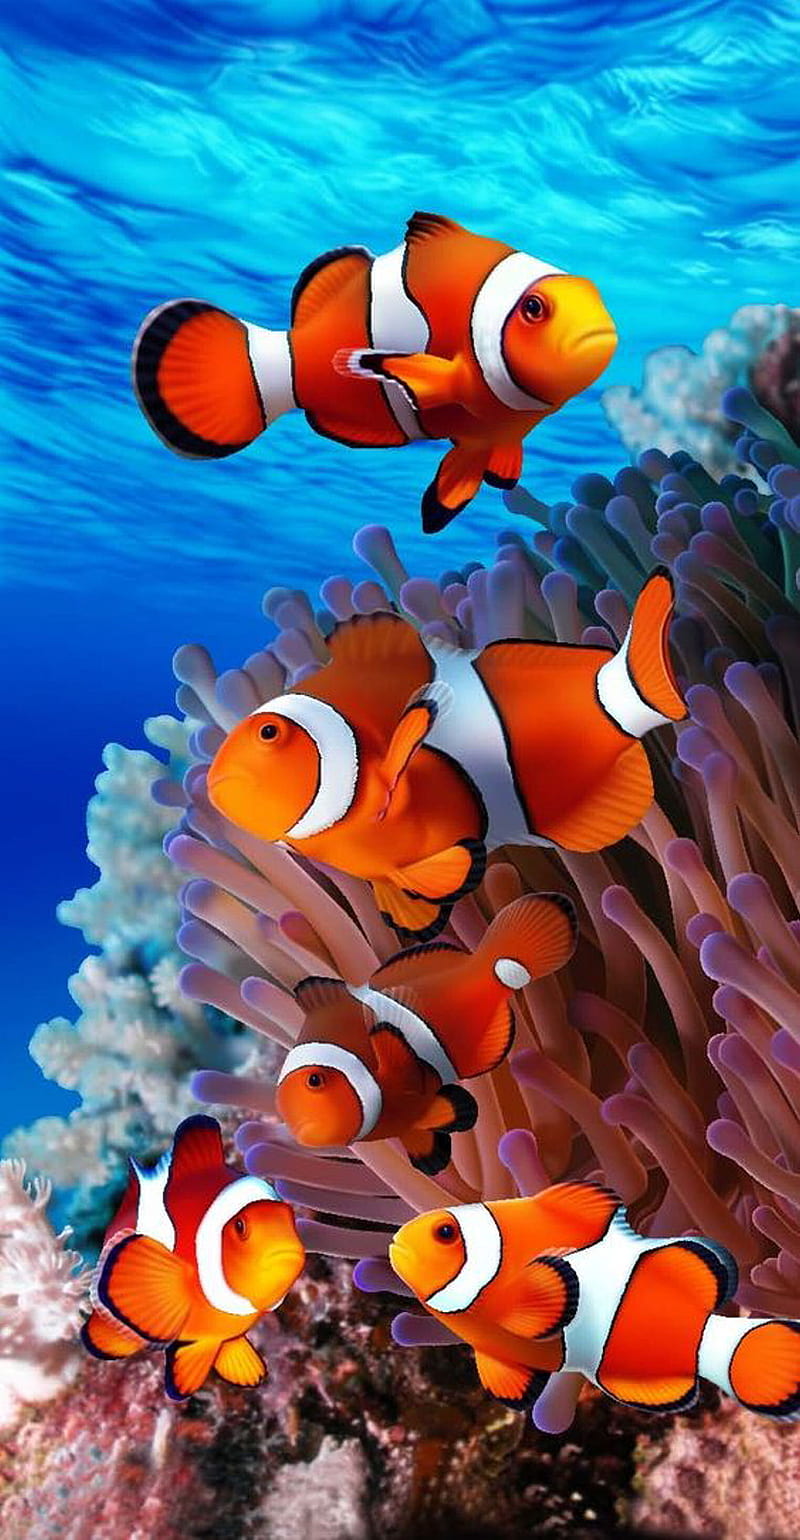 Clownfish Live In Anemone Background, Clownfish Marine Life, Hd Photography  Photo, Anemone Fish Background Image And Wallpaper for Free Download